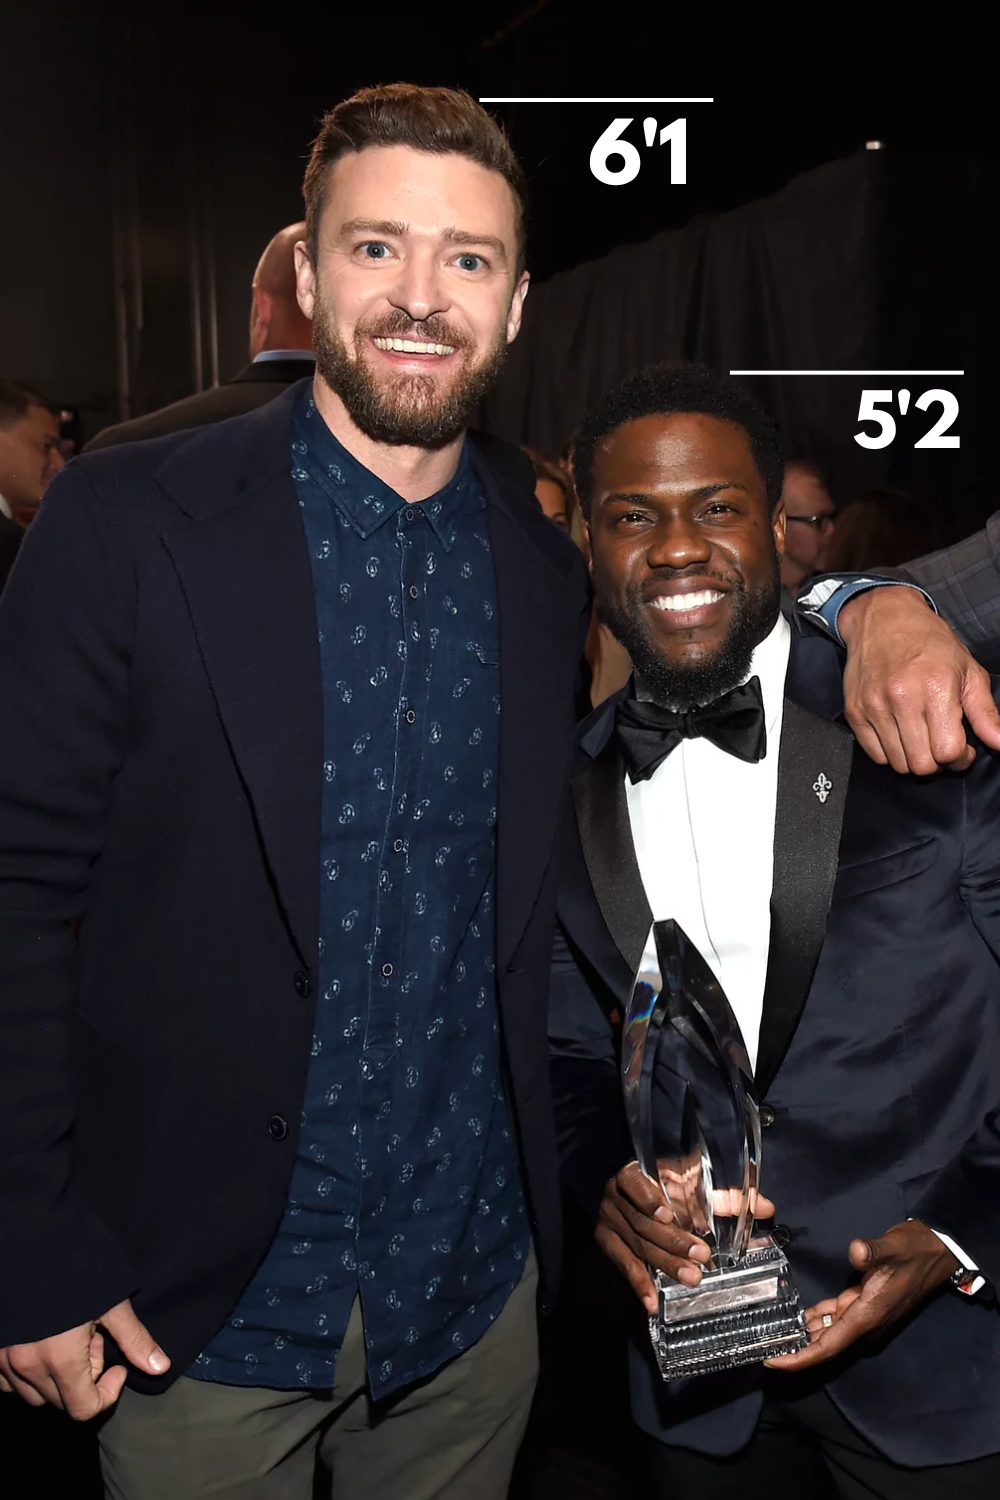 How tall is justin timberlake